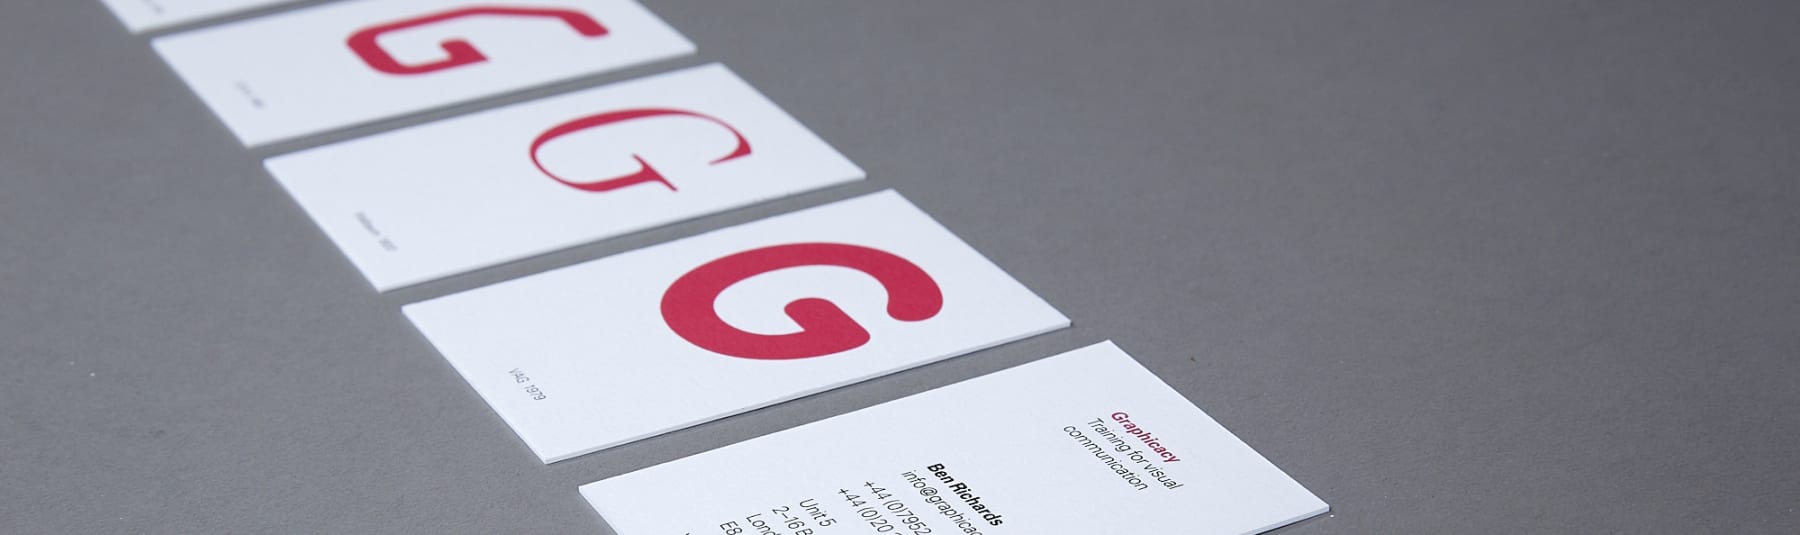 Business cards on table with prominant red G